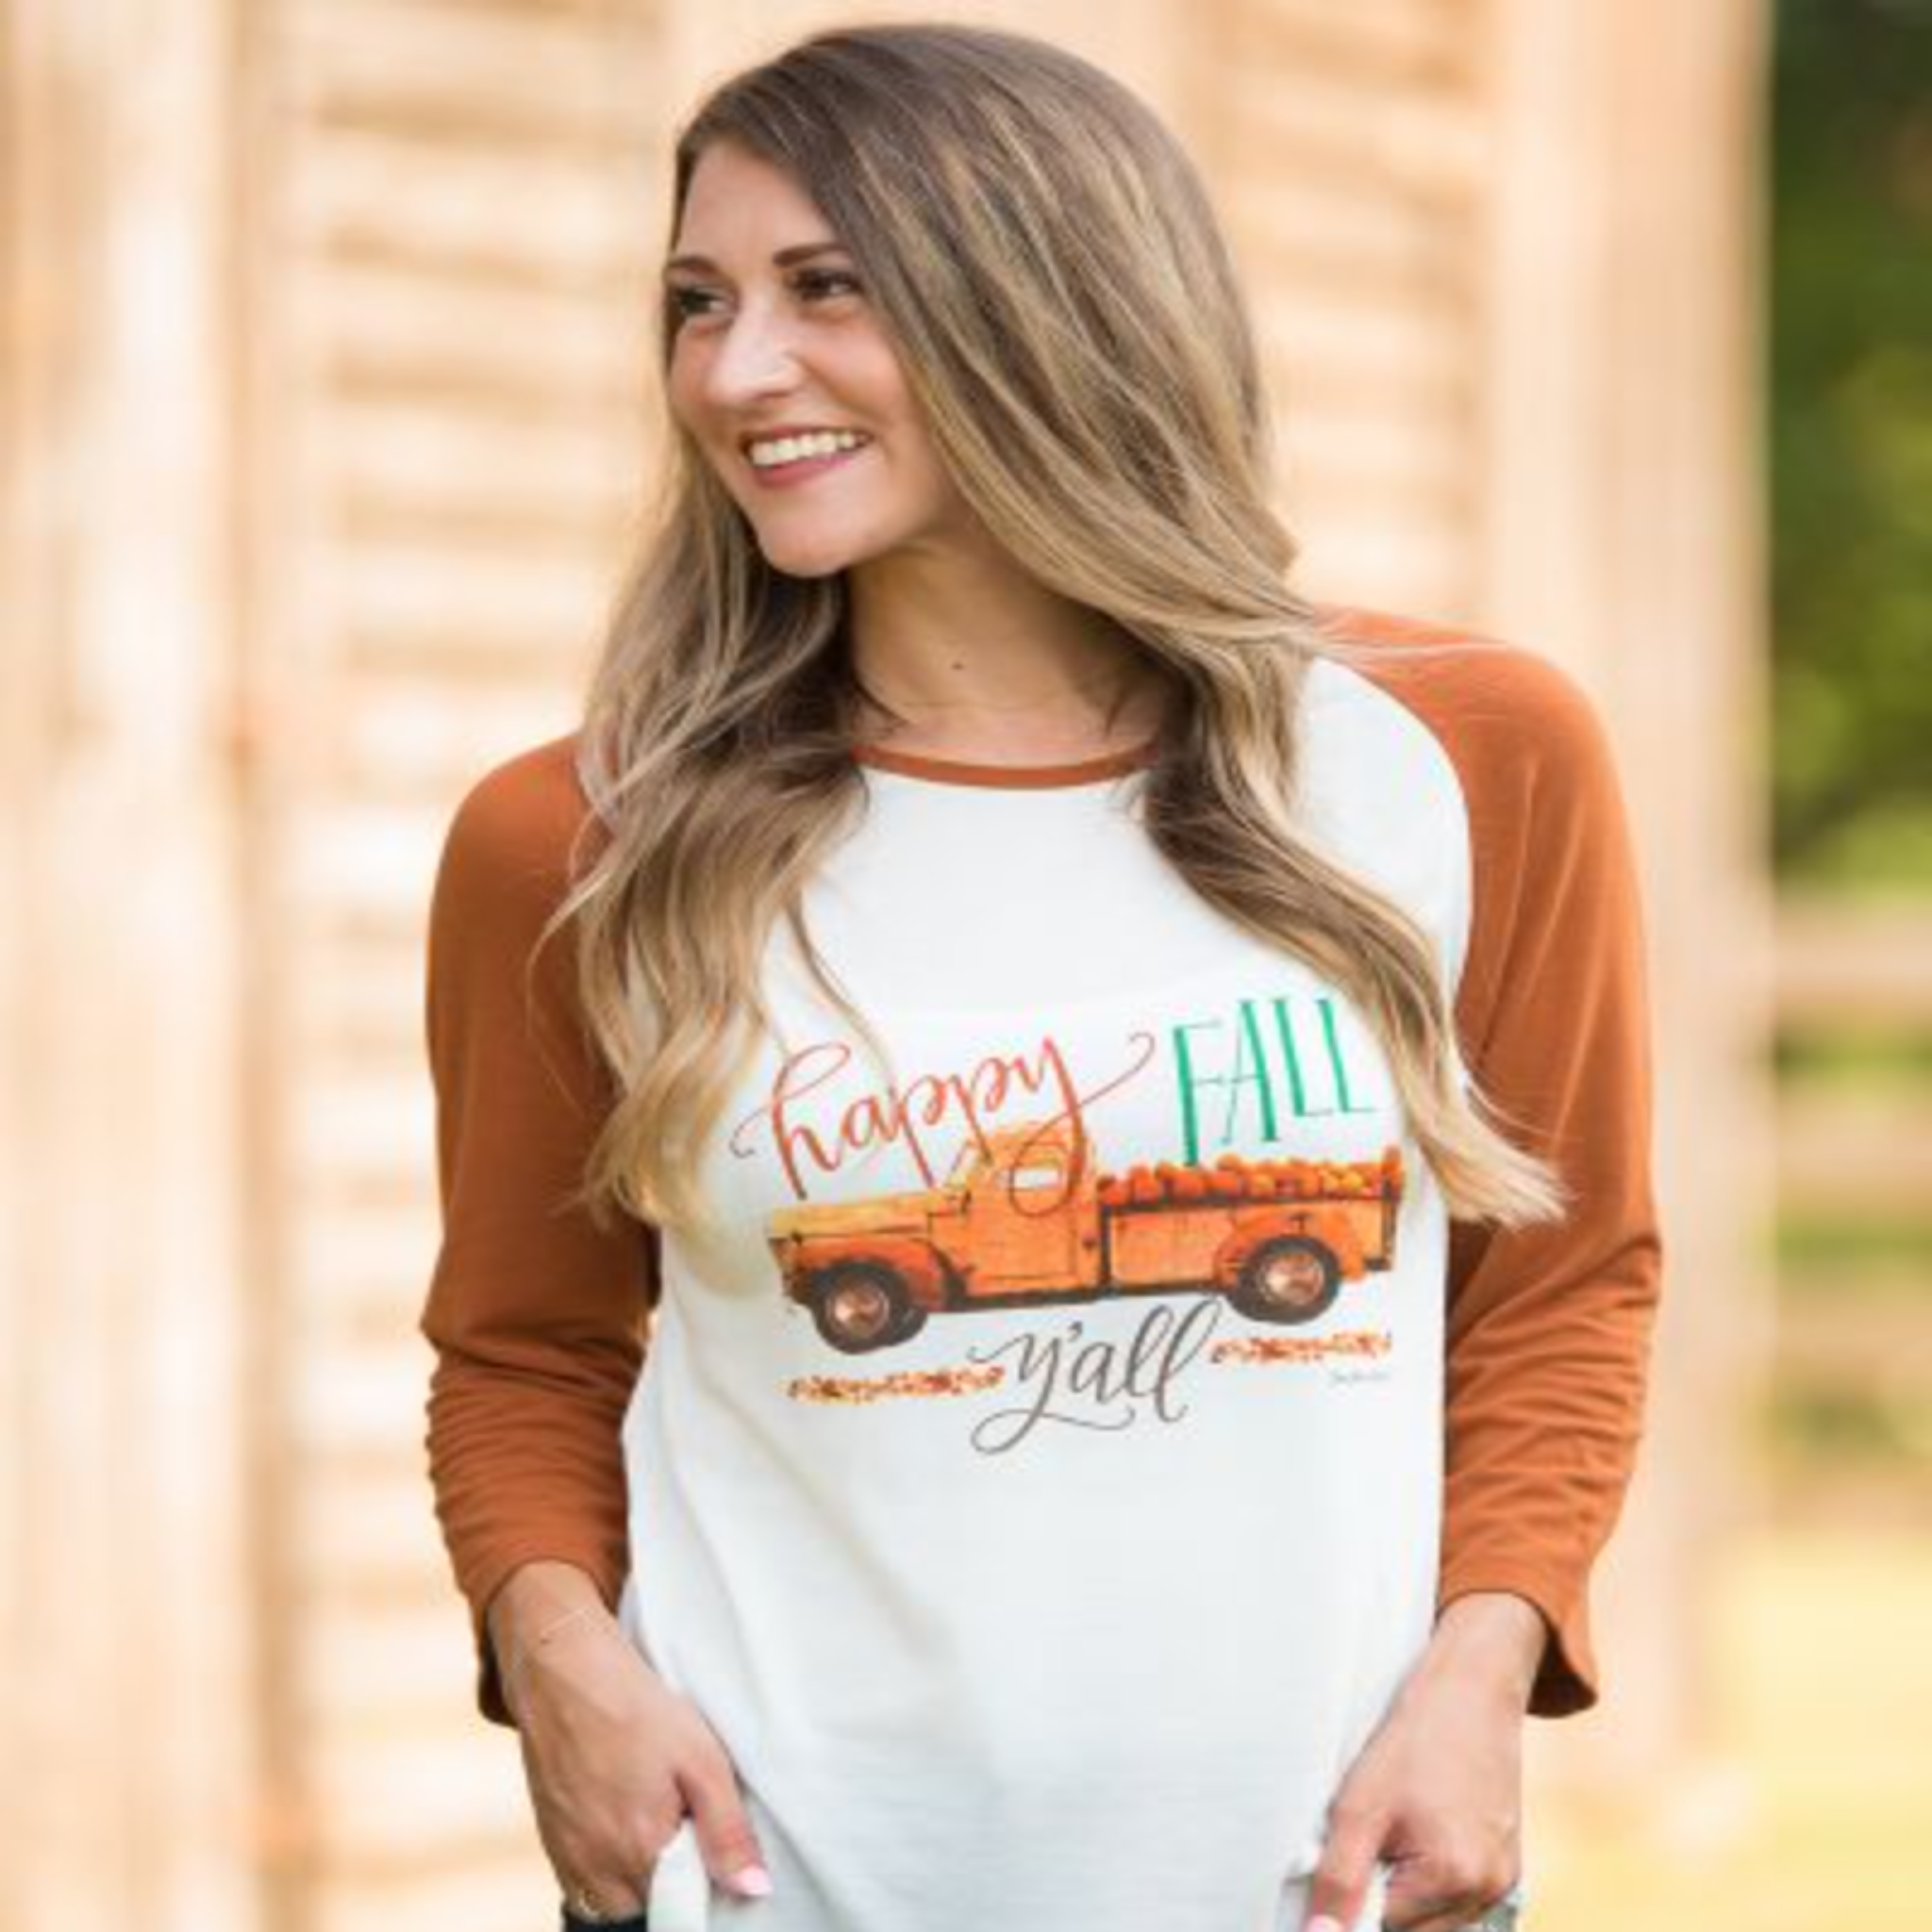 Happy Fall Yall by Southern Grace